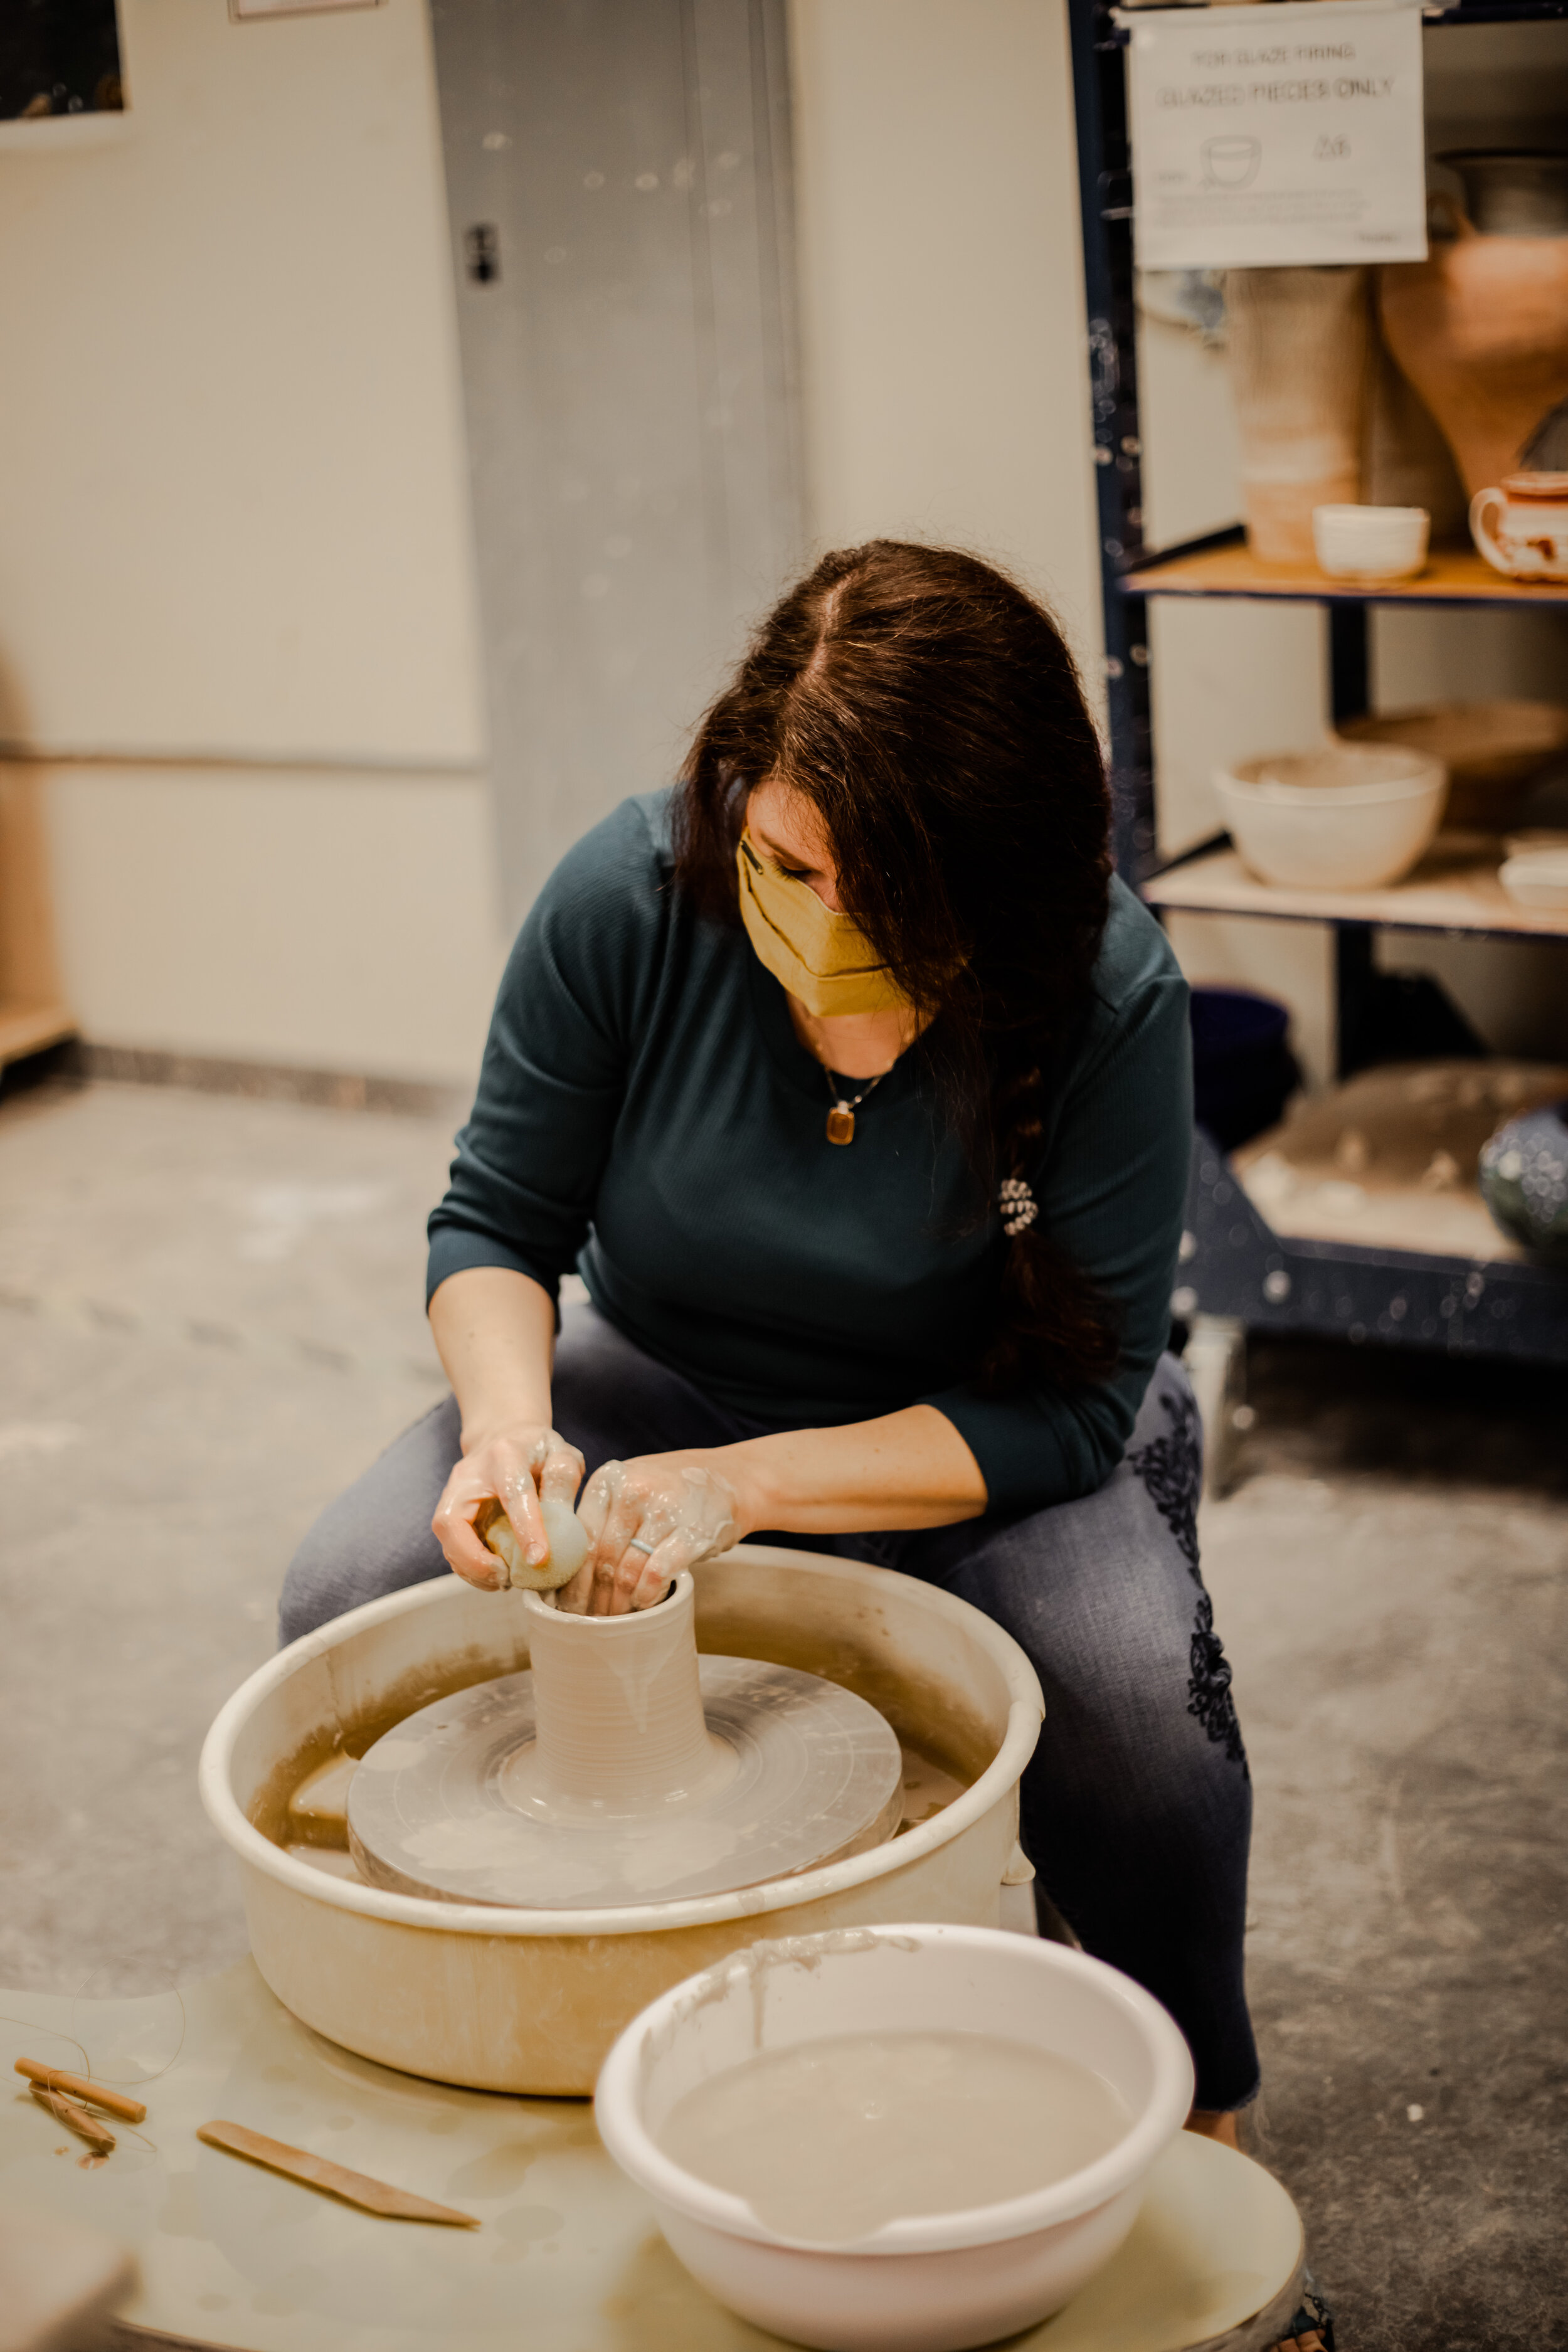 Hayley De Gonzalez is an art professor at NGU. One of the classes she teaches is Ceramics, and she is extremely talented in the art.